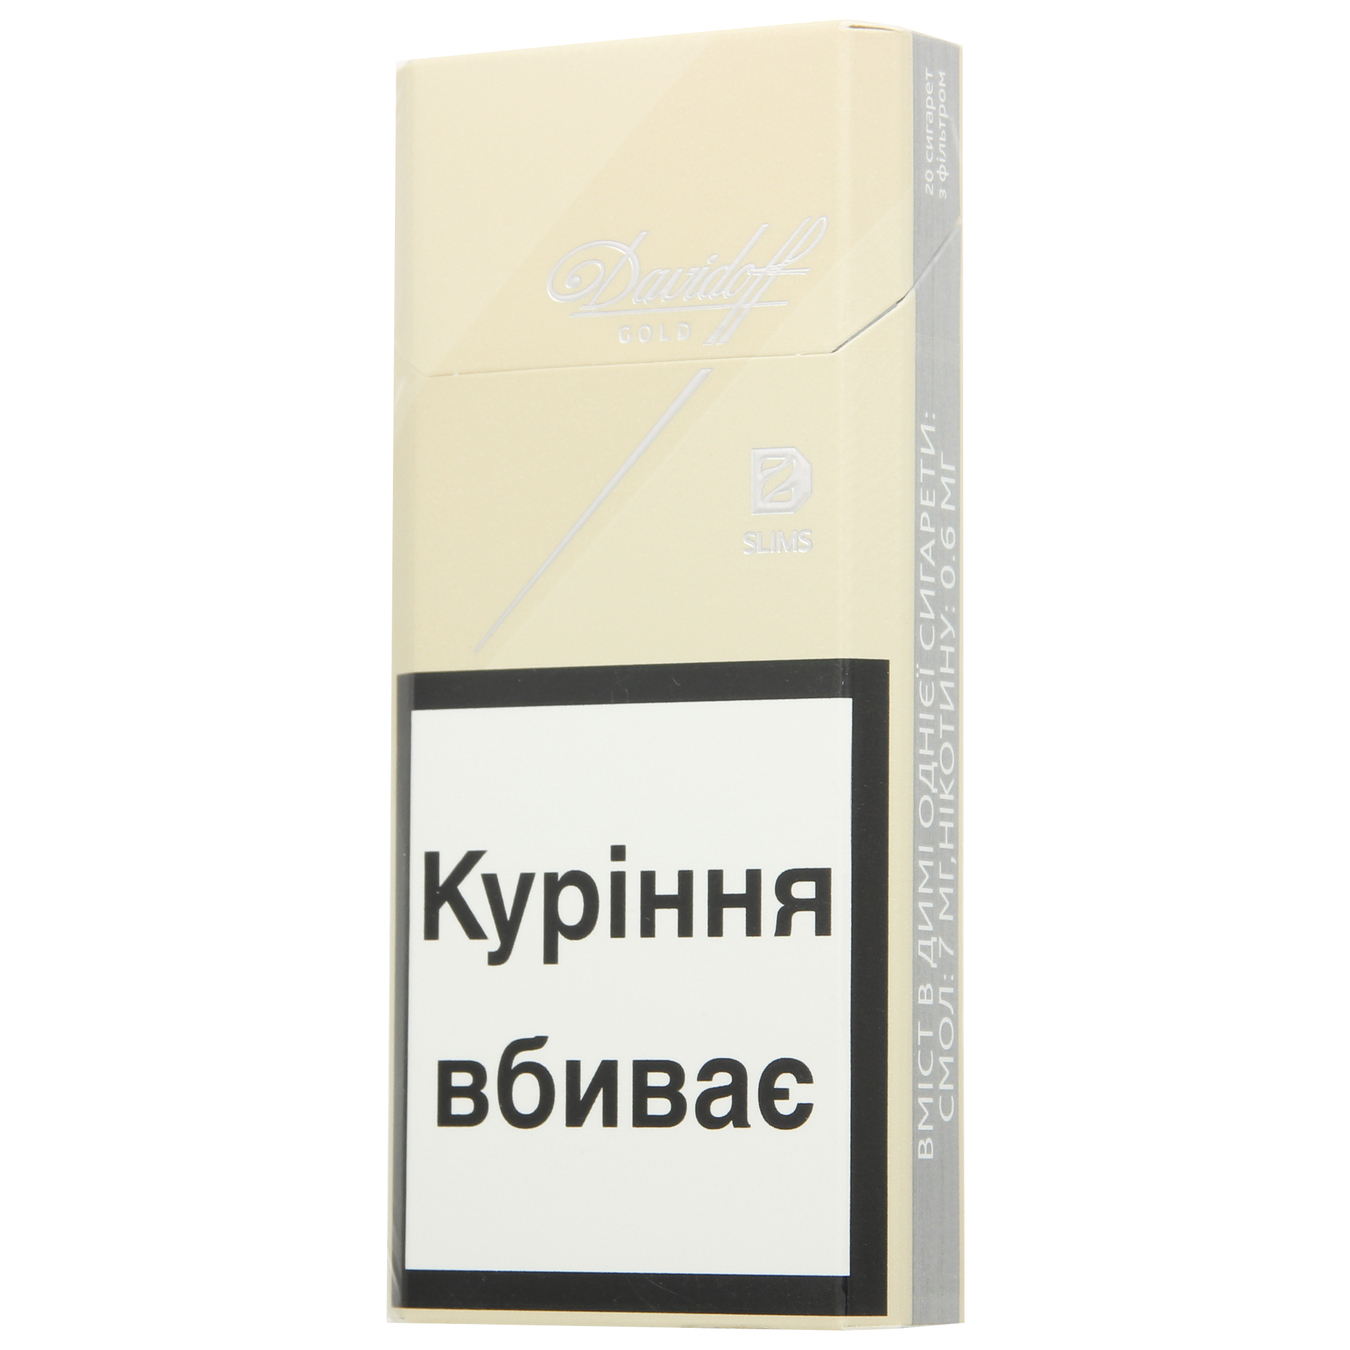 Davidoff Gold Slims cigarettes 20 pcs (the price is indicated without excise tax) 5